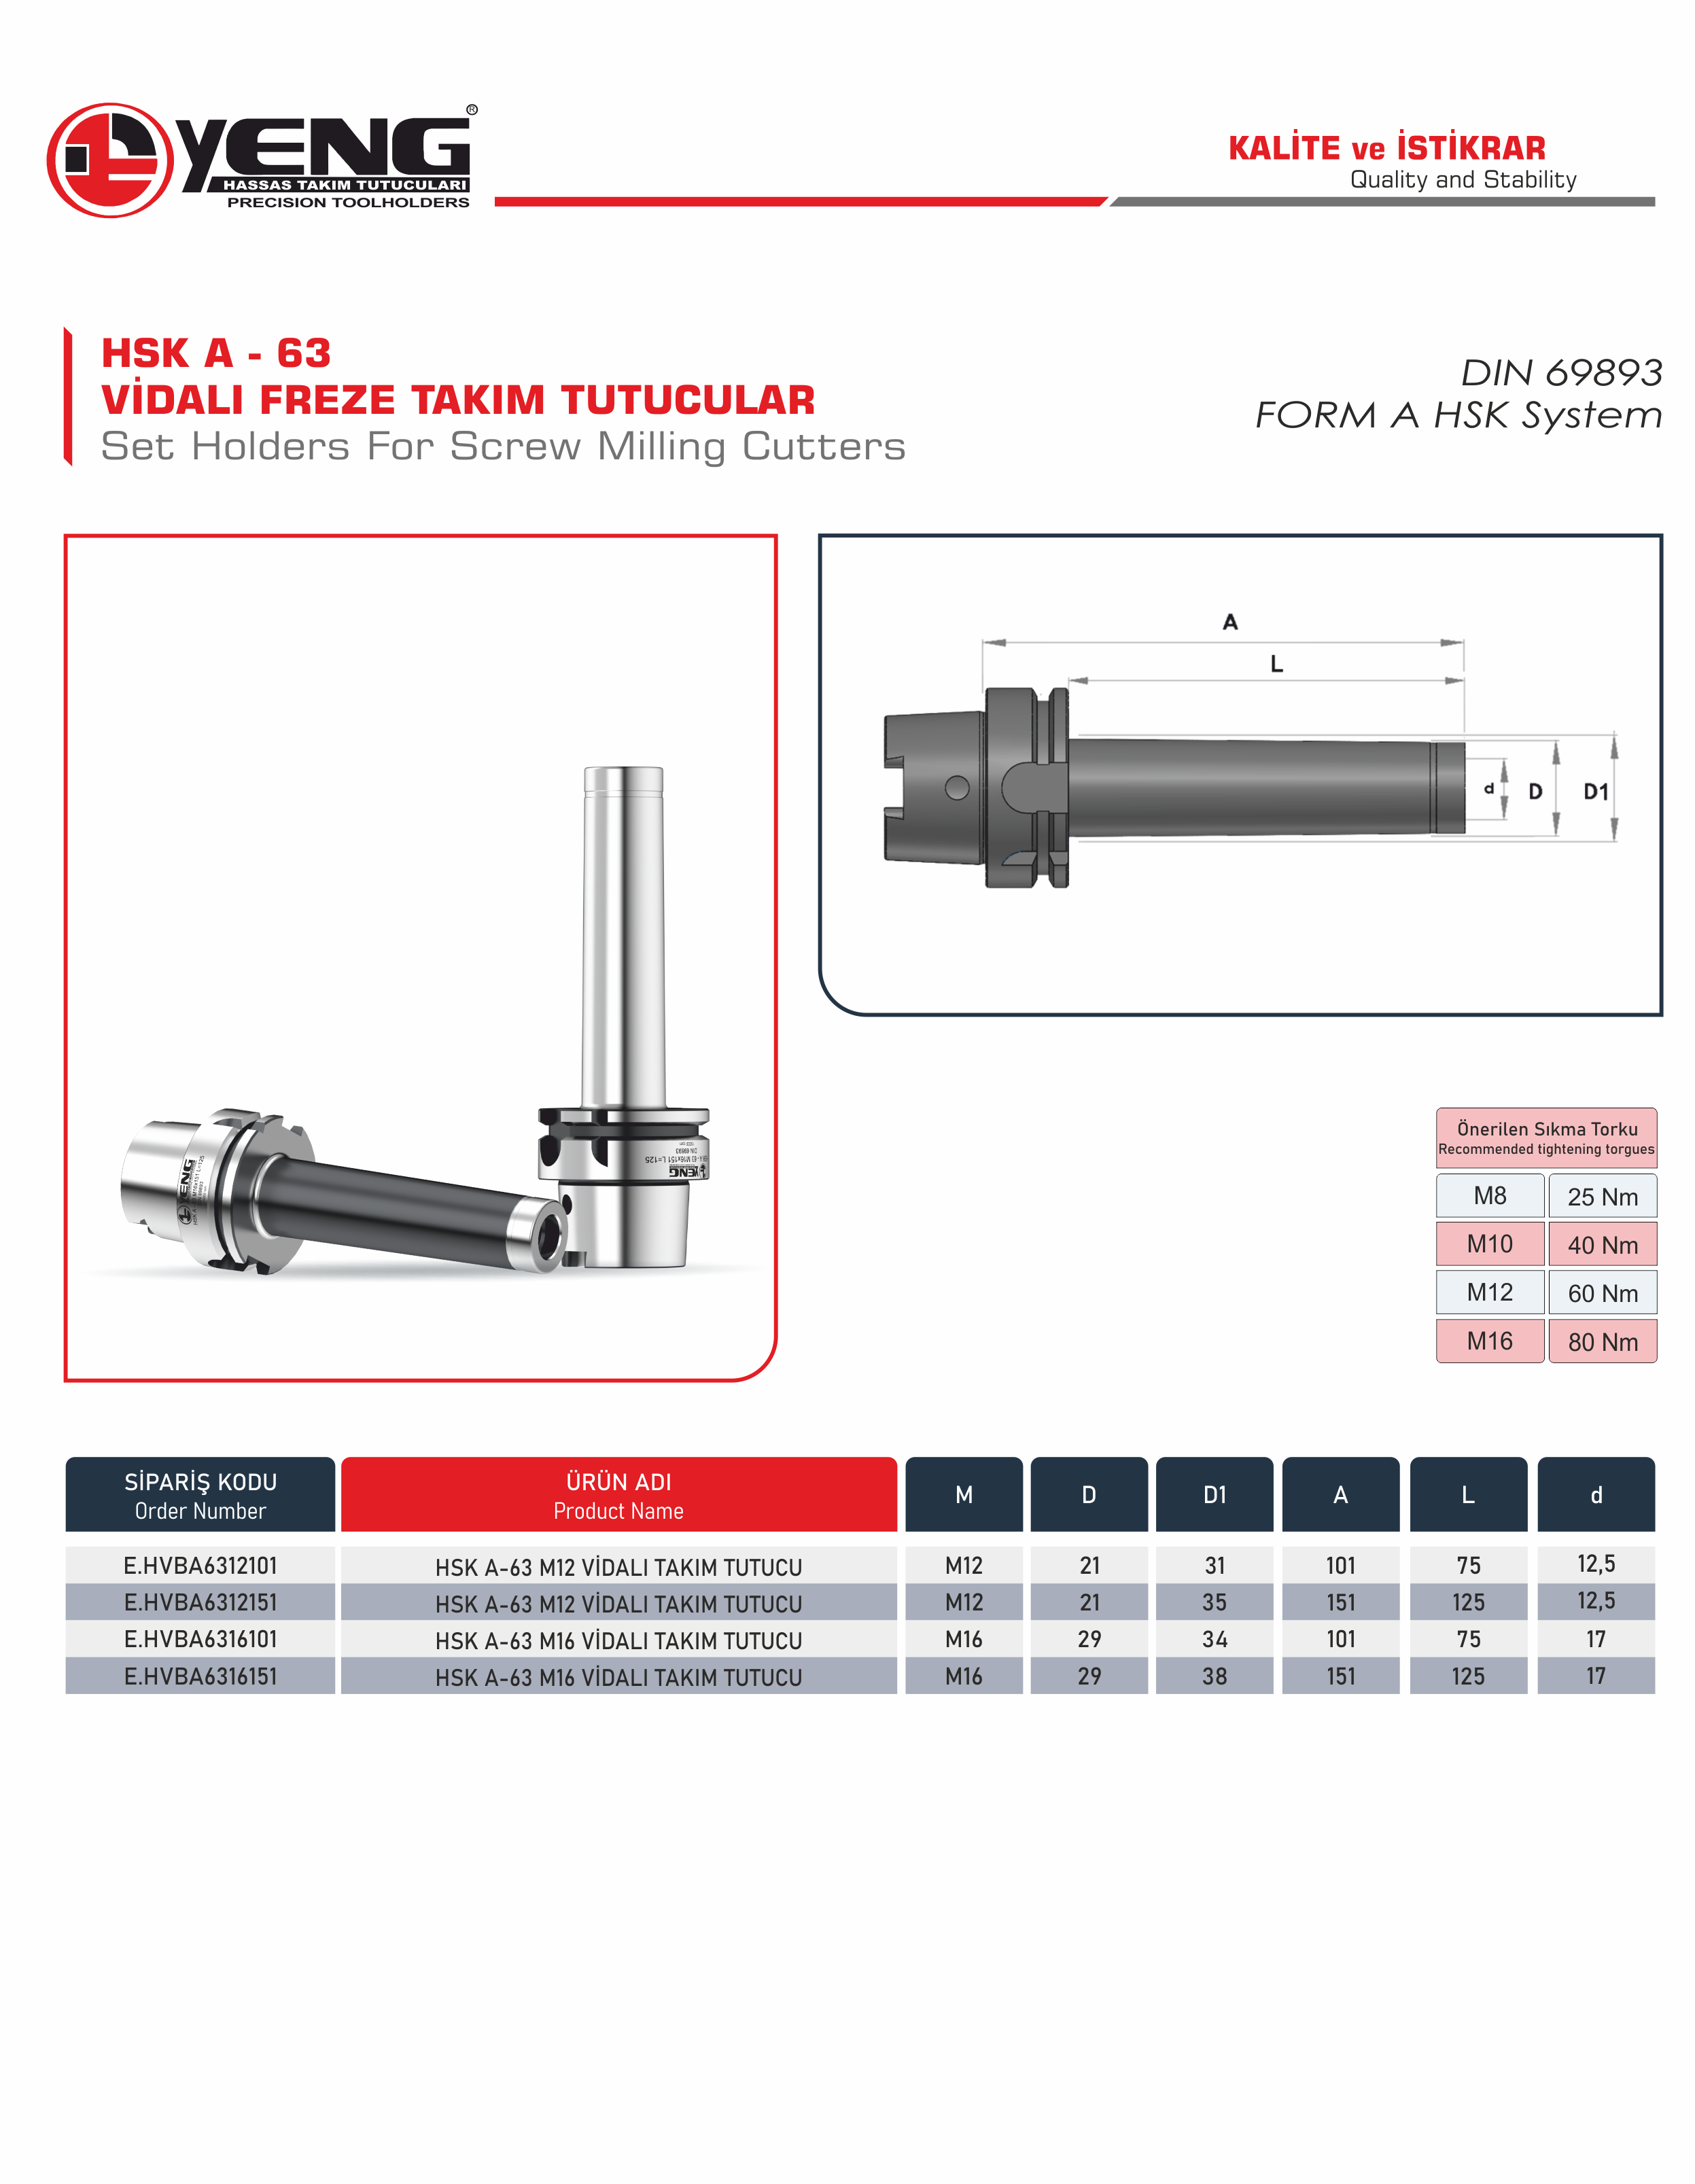 HSK A - 63 Set Holders For Screw Milling Cutters